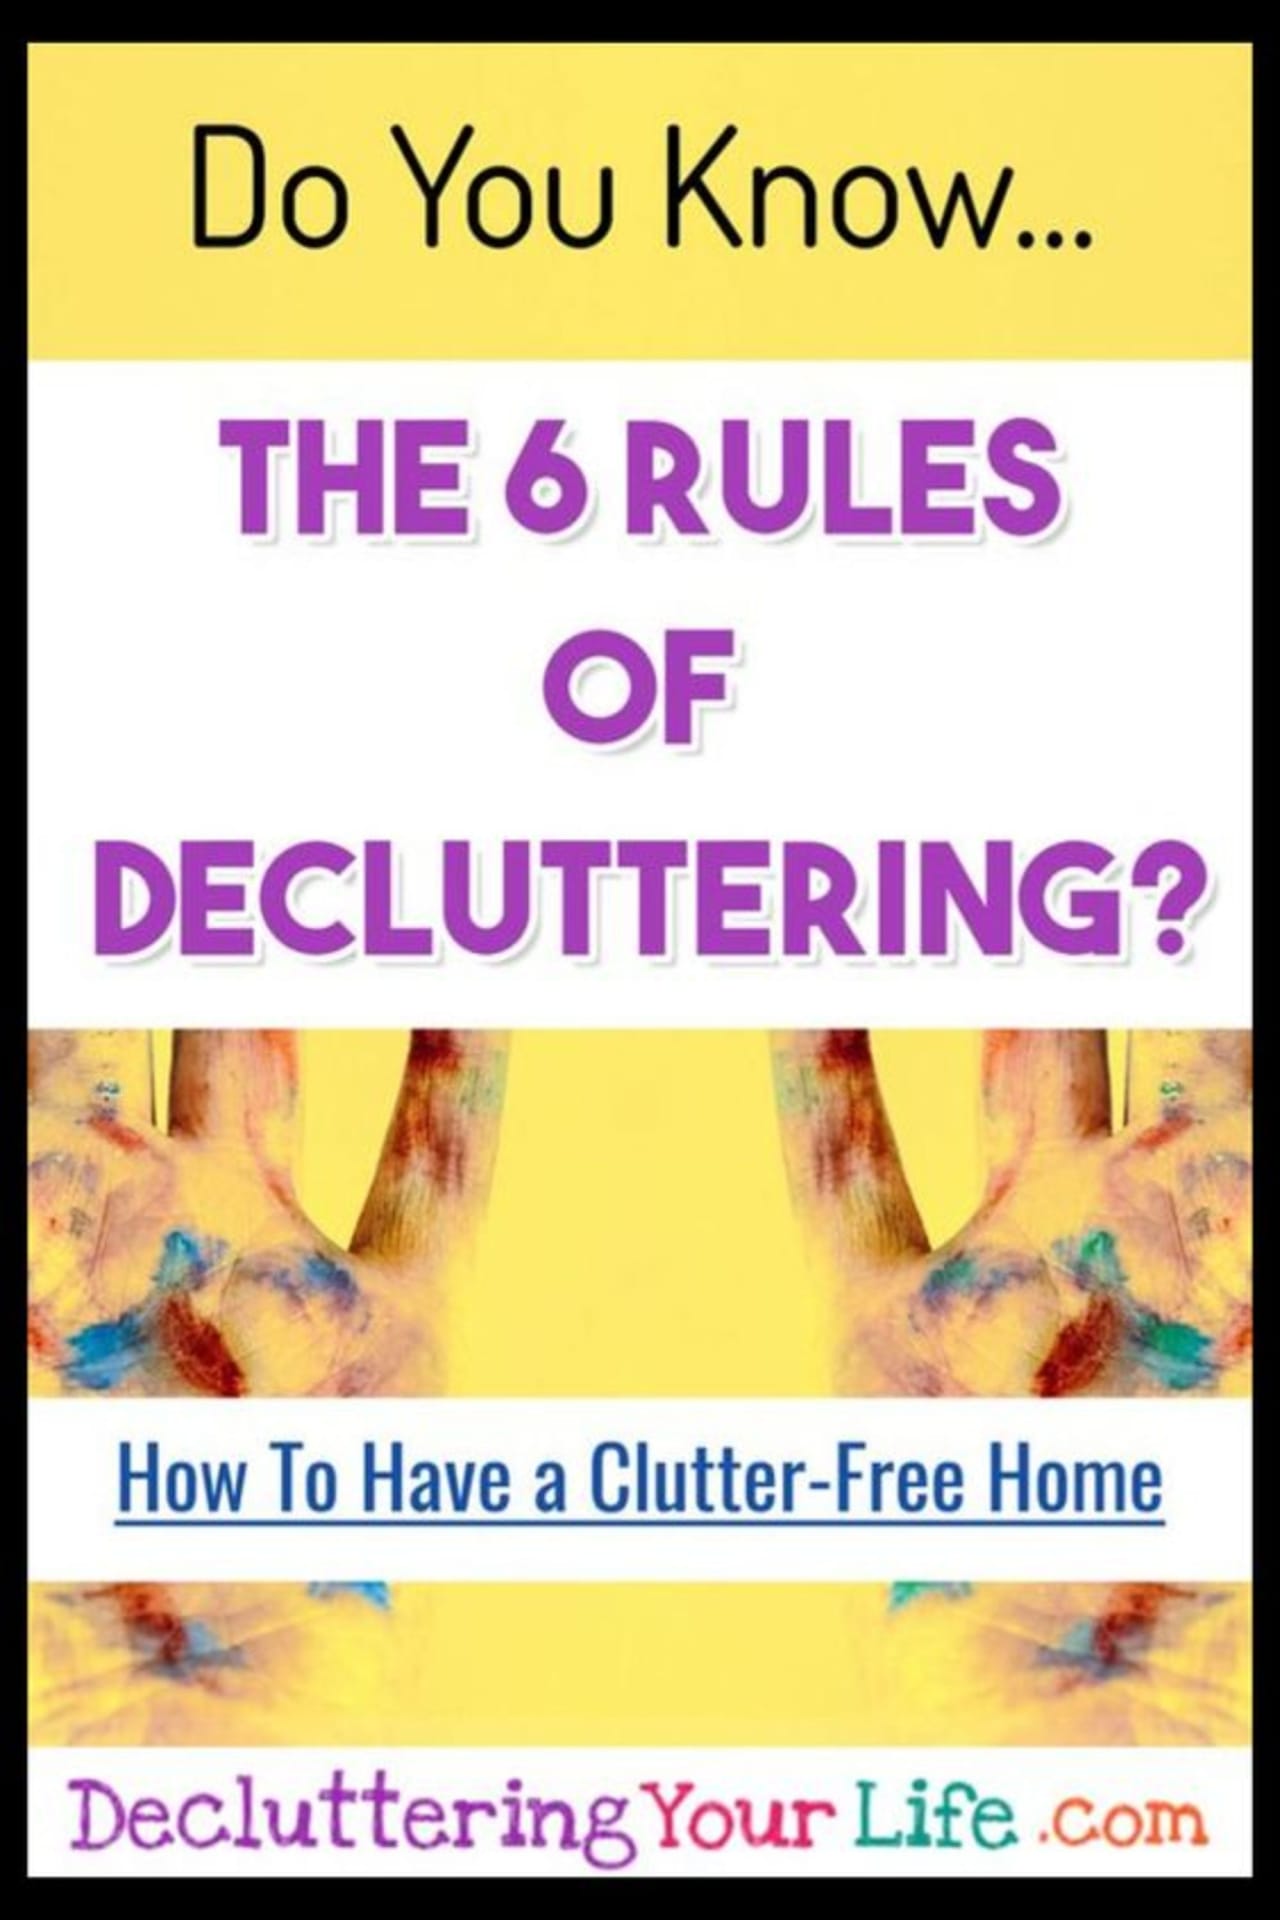 Decluttering ideas - how to declutter and organize when feeling overwhelmed - decluttering tips for packrats and hoarding help